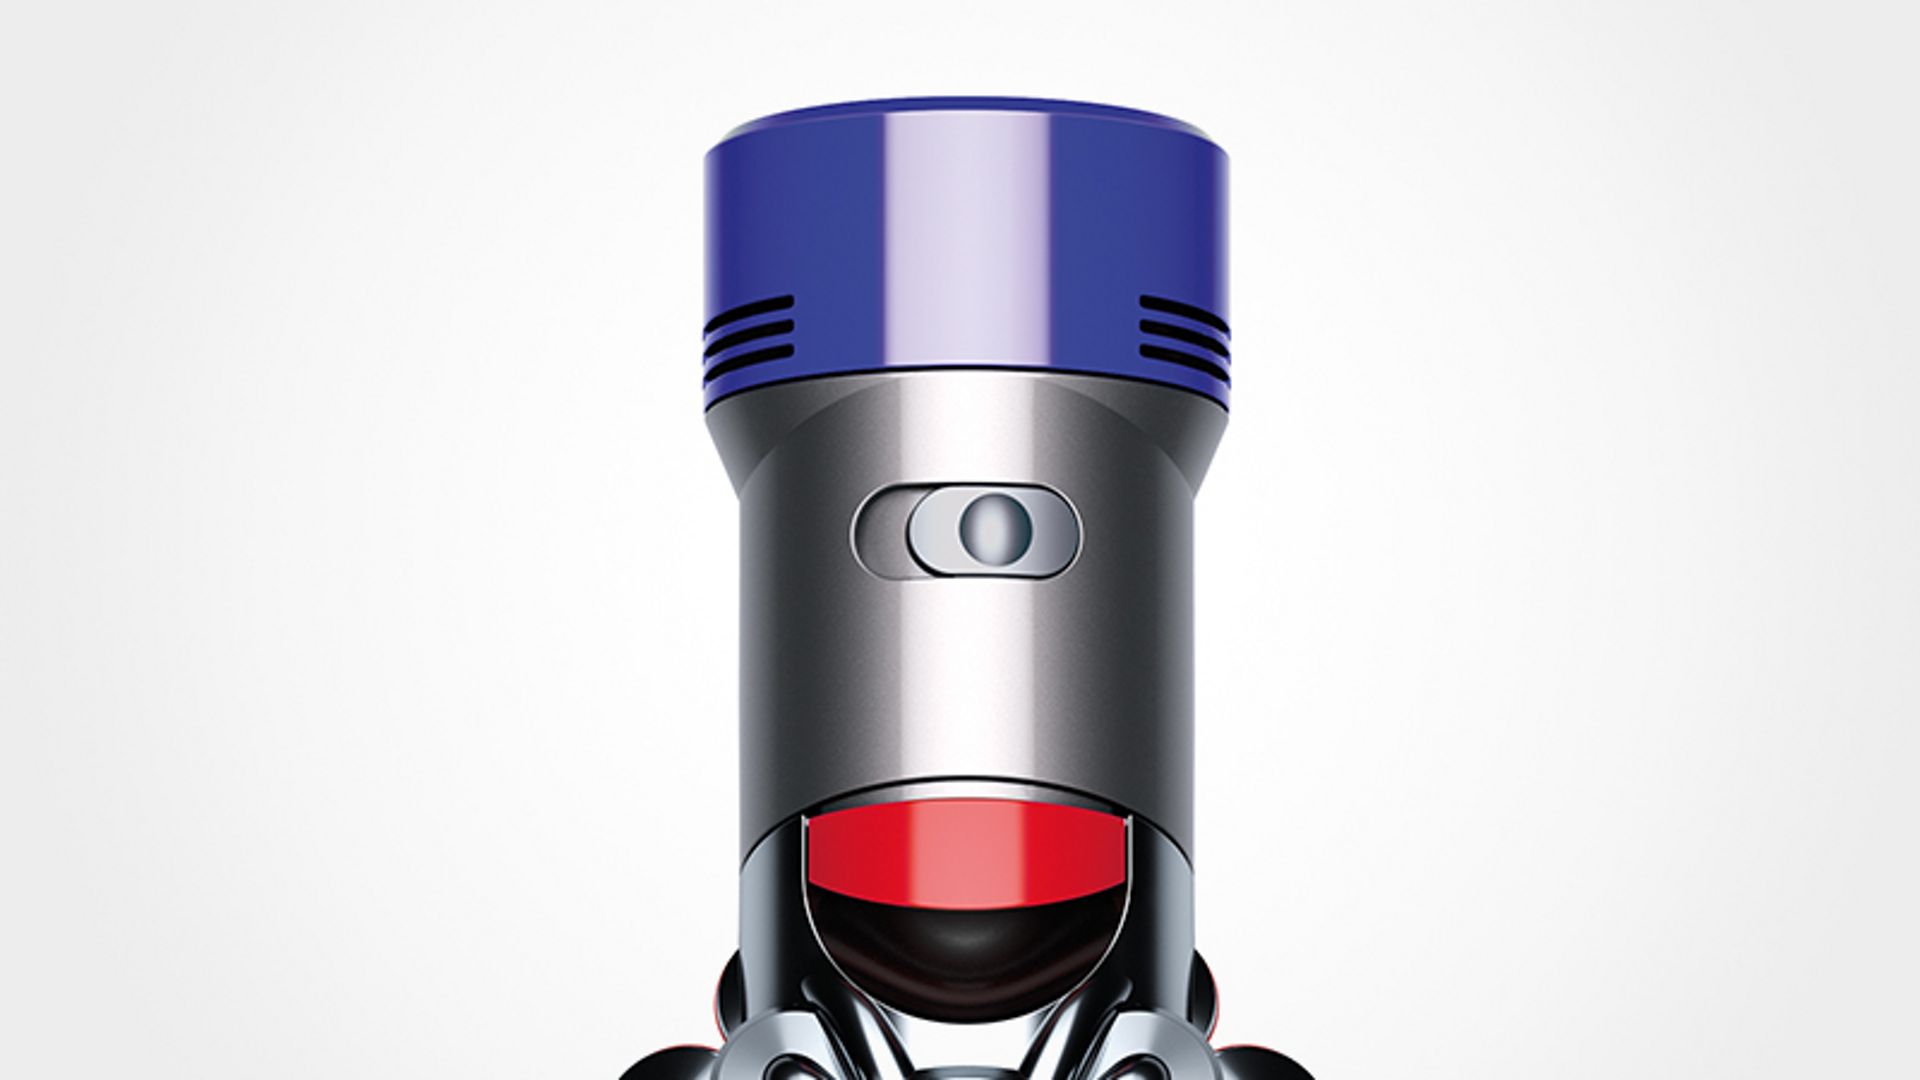 Close-up of Dyson V8 Absolute vacuum power mode switch